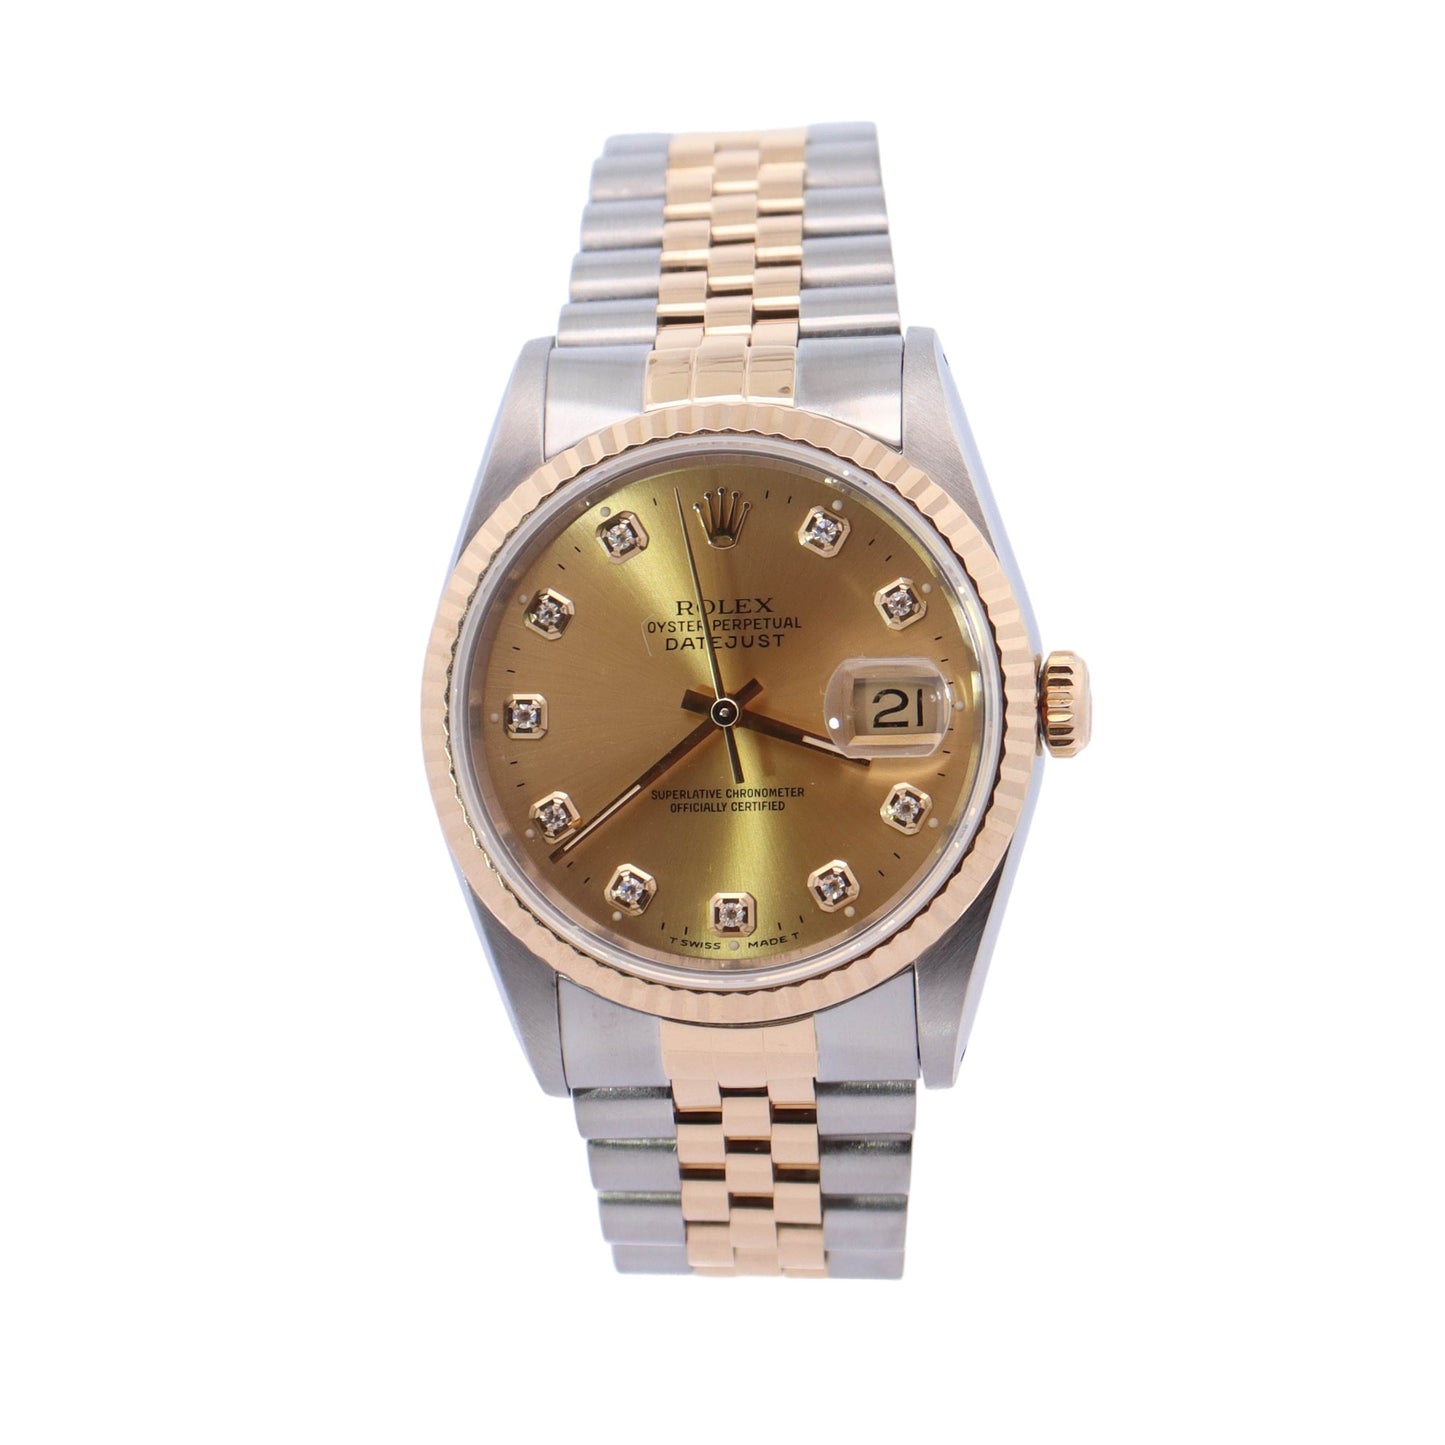 Rolex Datejust Two Tone Steel & Yellow Gold 36mm Champagne Diamond Dot Dial Watch Reference #: 16233